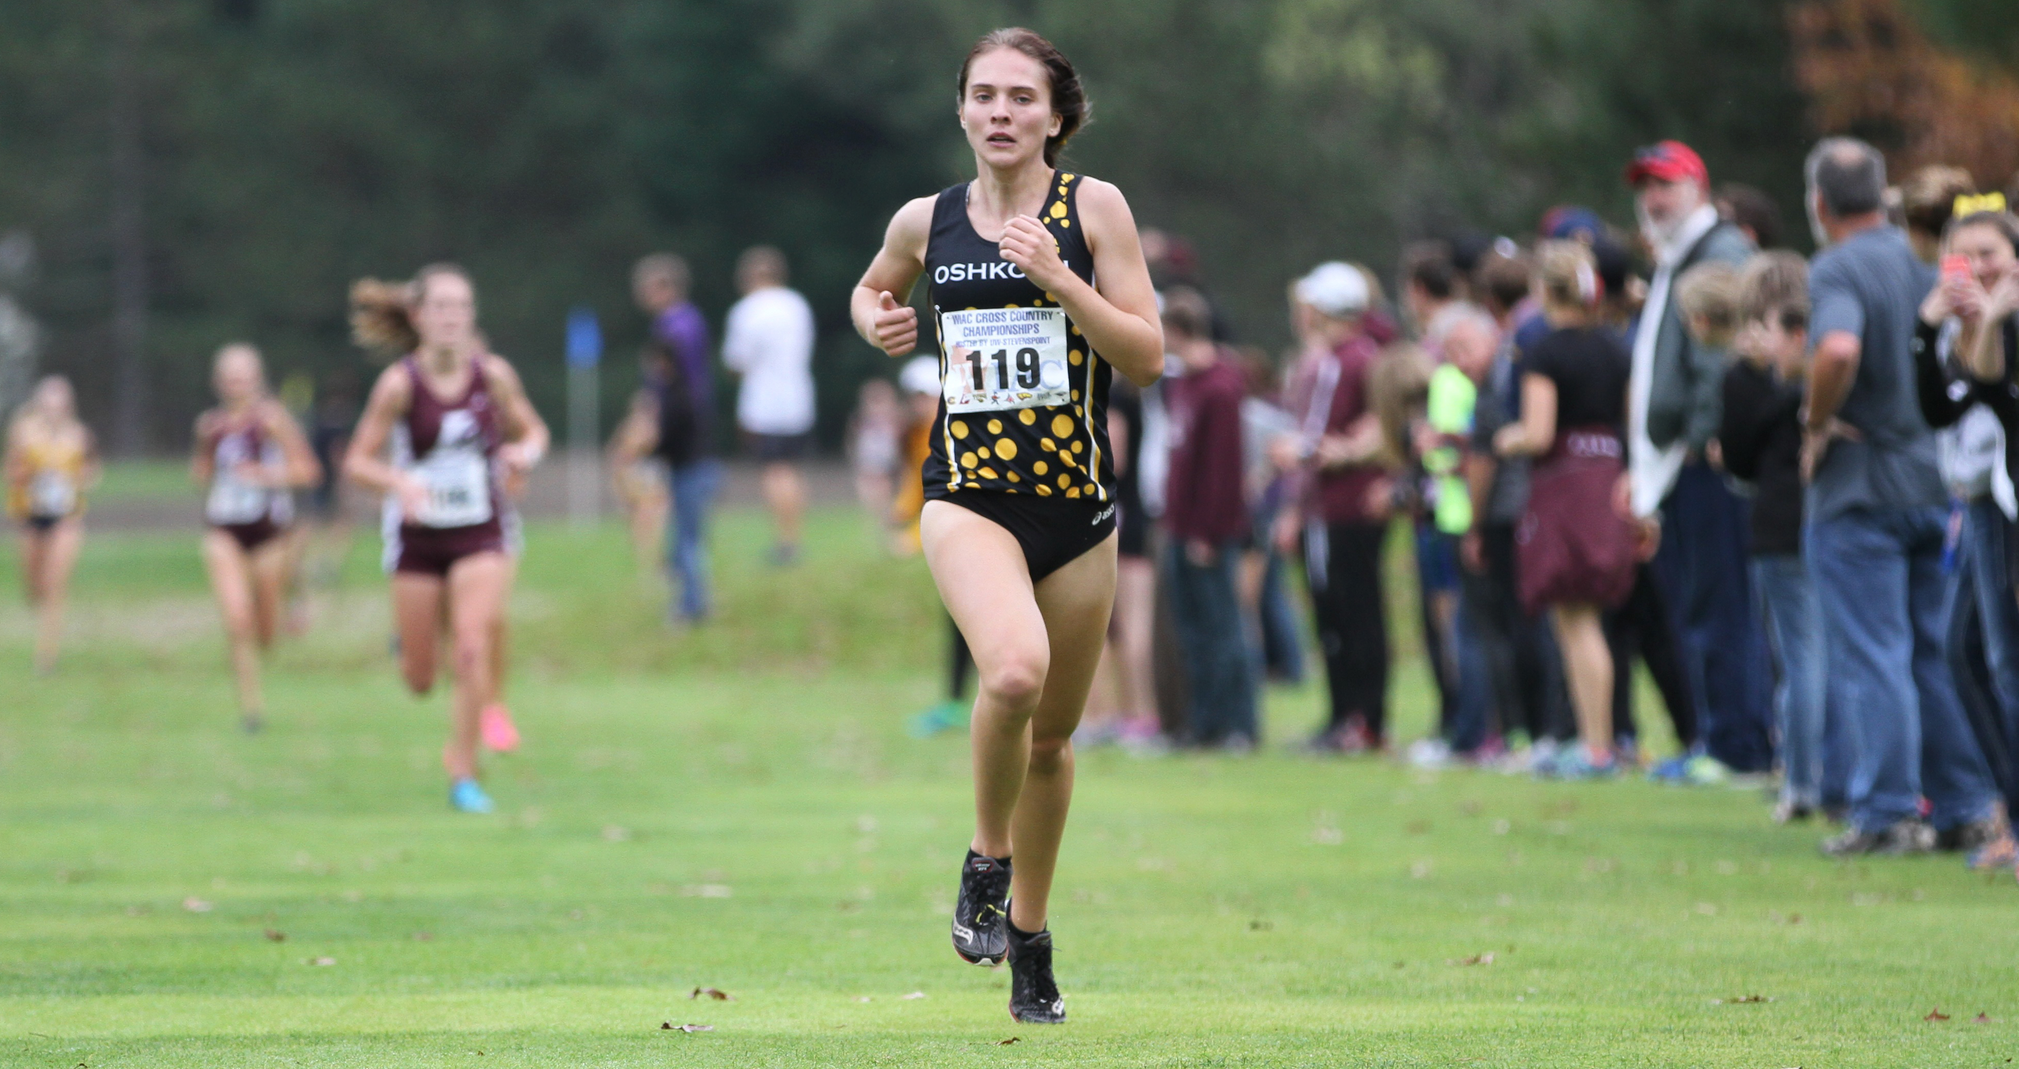 Cheyenne Moore paced the Titans with a ninth-place showing at the Vic Godfrey Open.